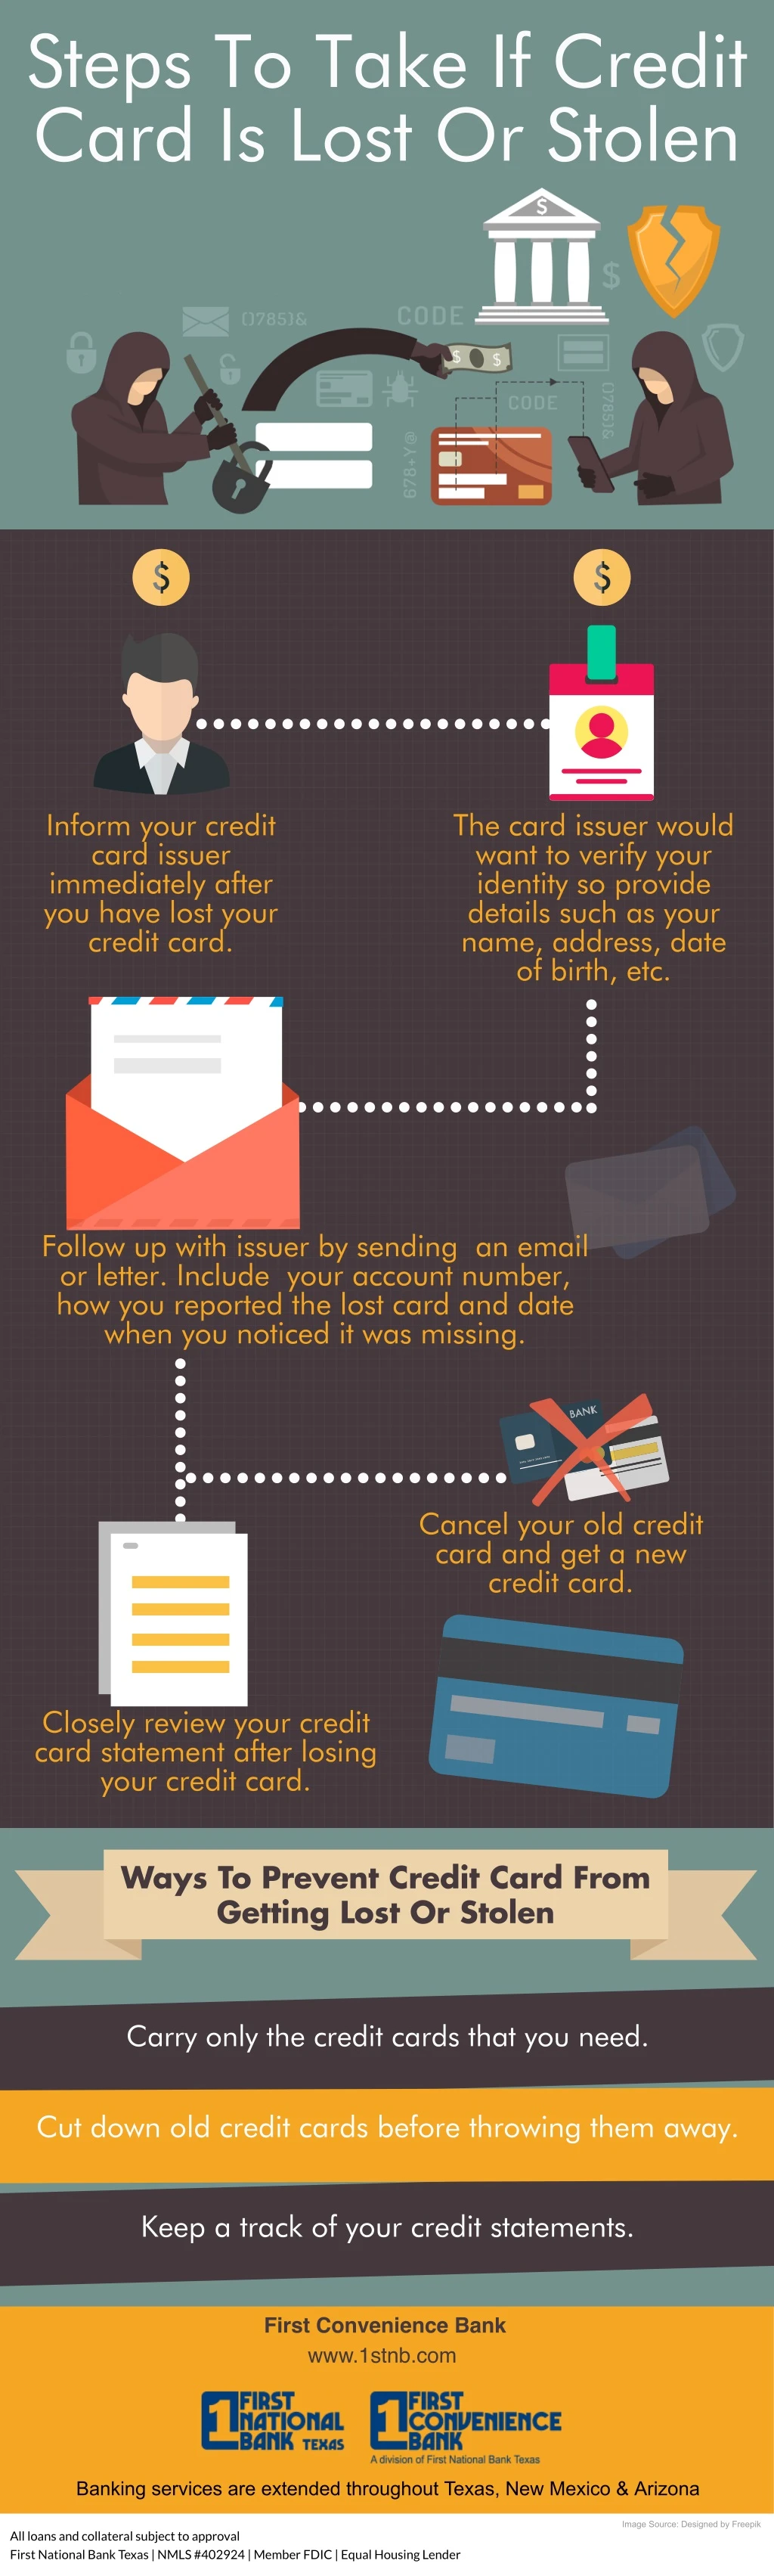 steps to take if credit card is lost or stolen